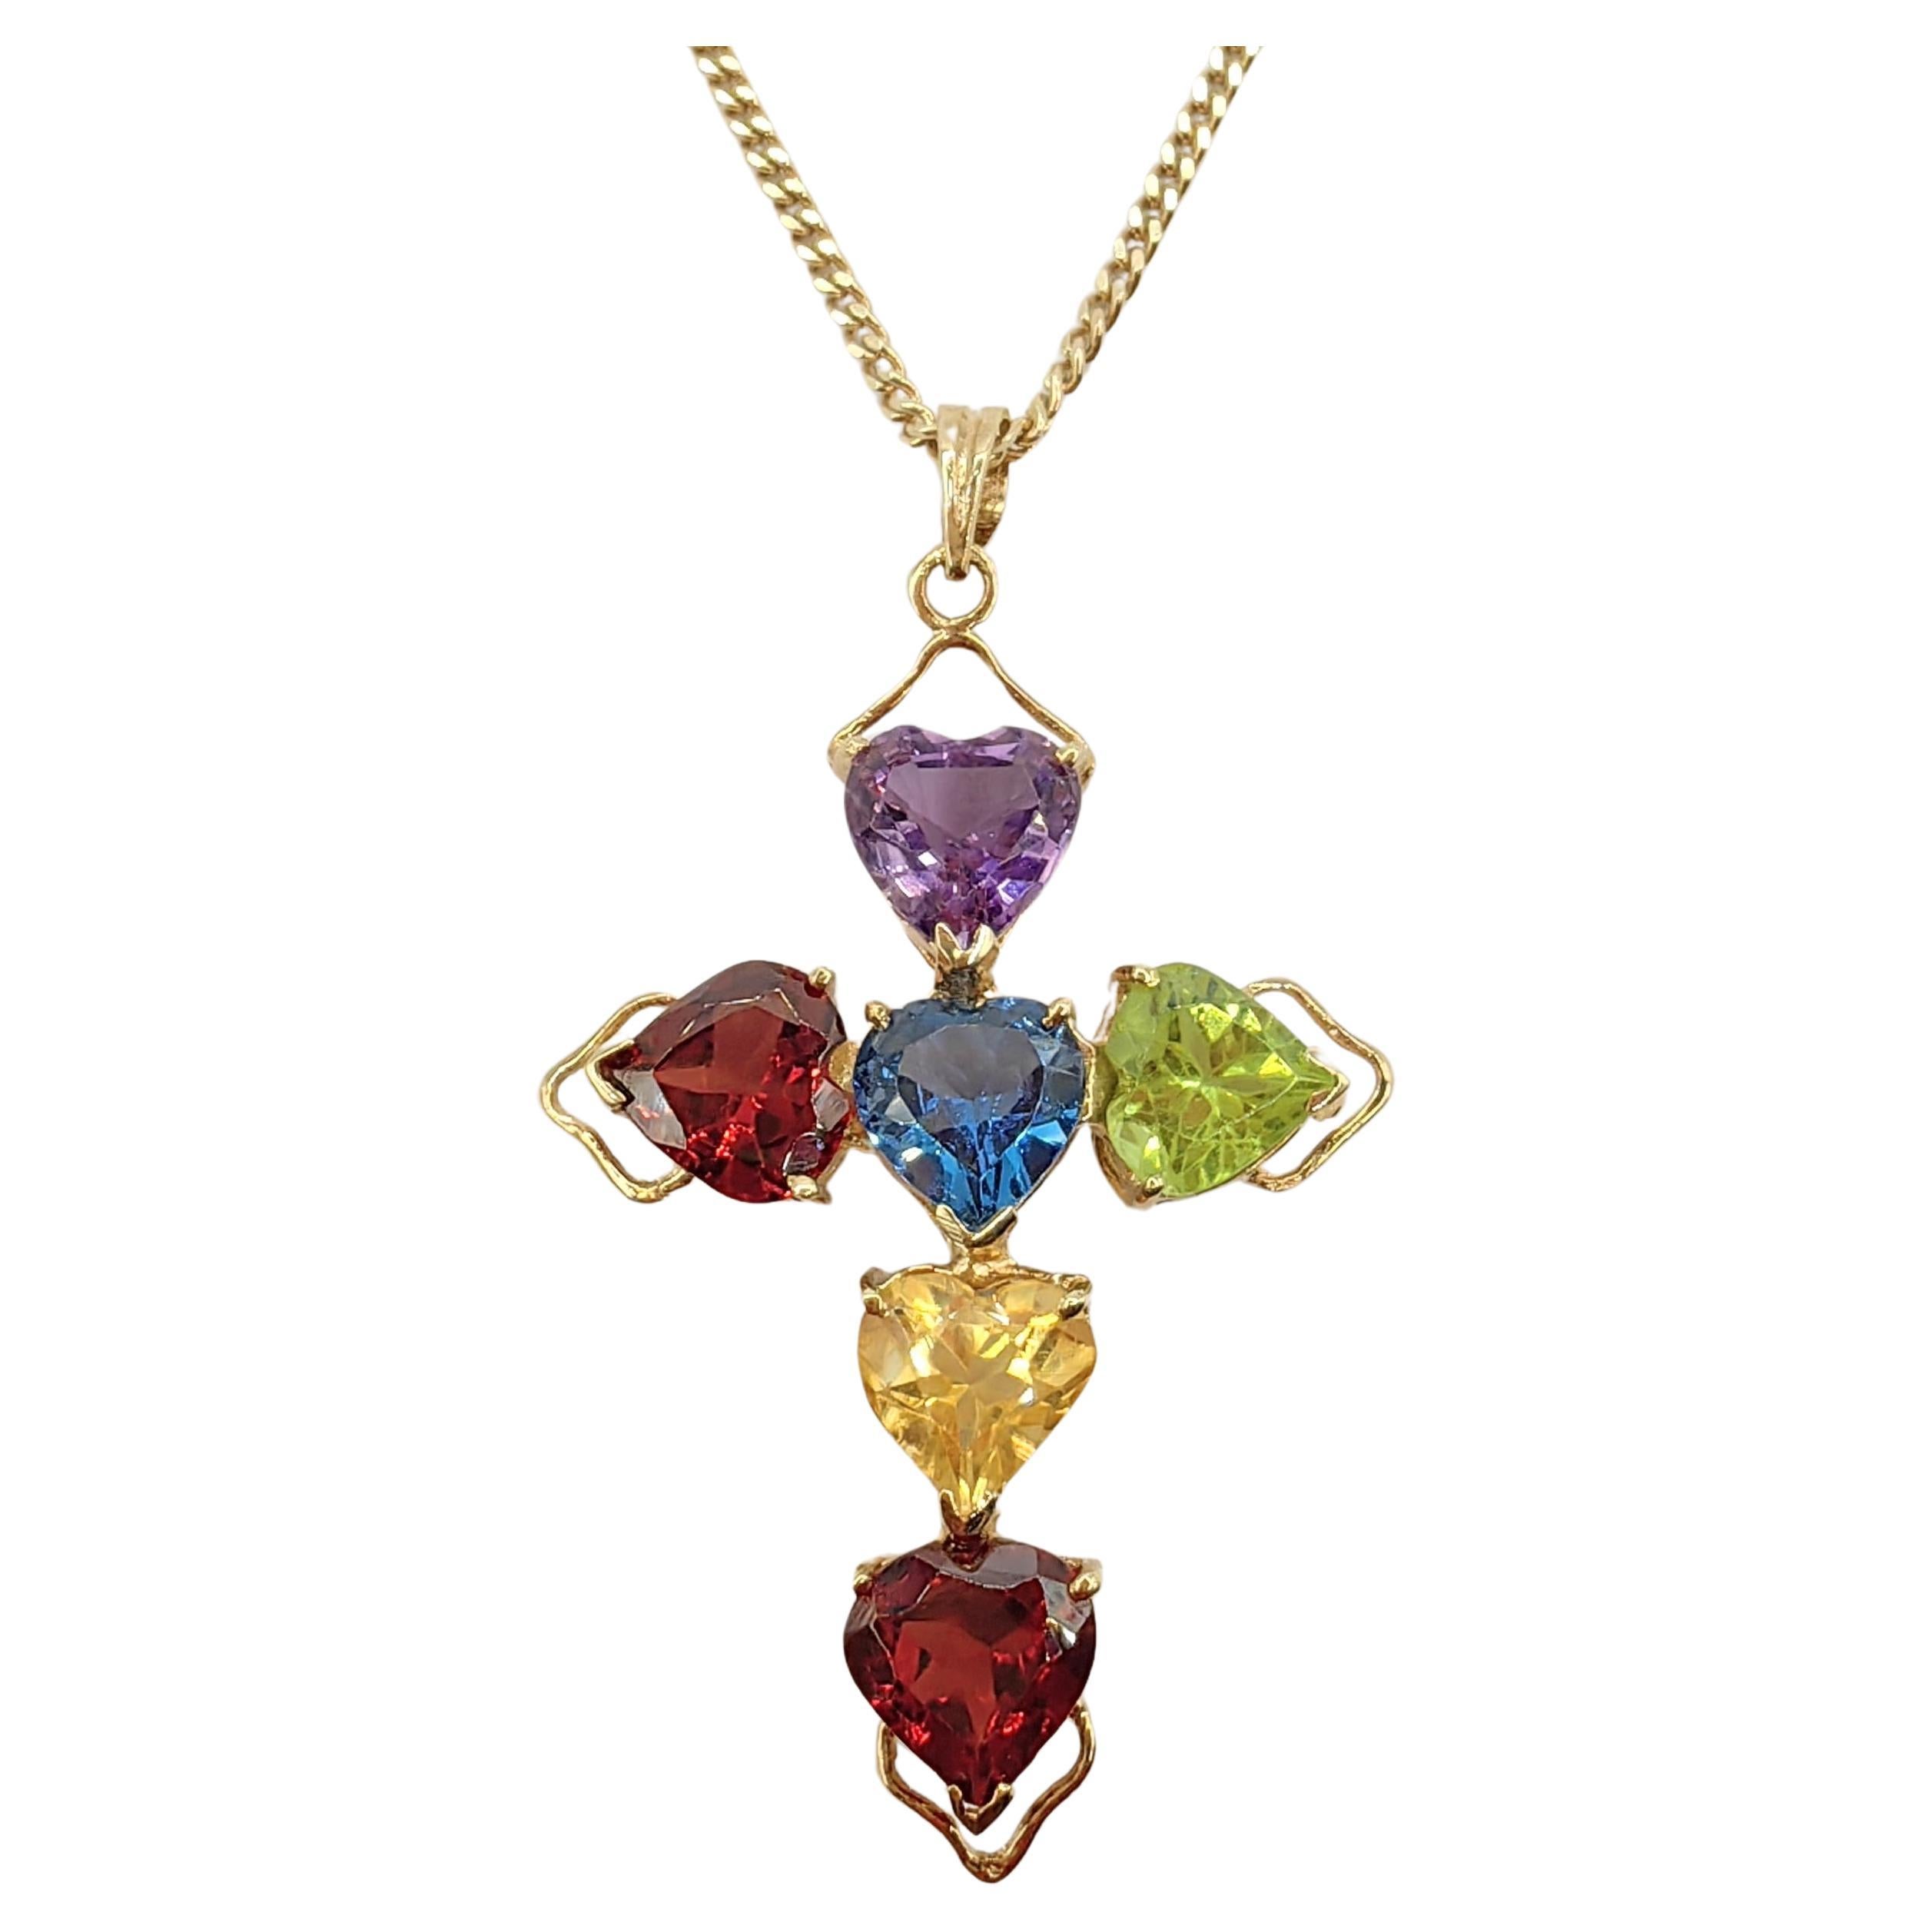 Vintage Heart Cut Mixed Stones Cross Necklace Pendant in 14K Yellow Gold